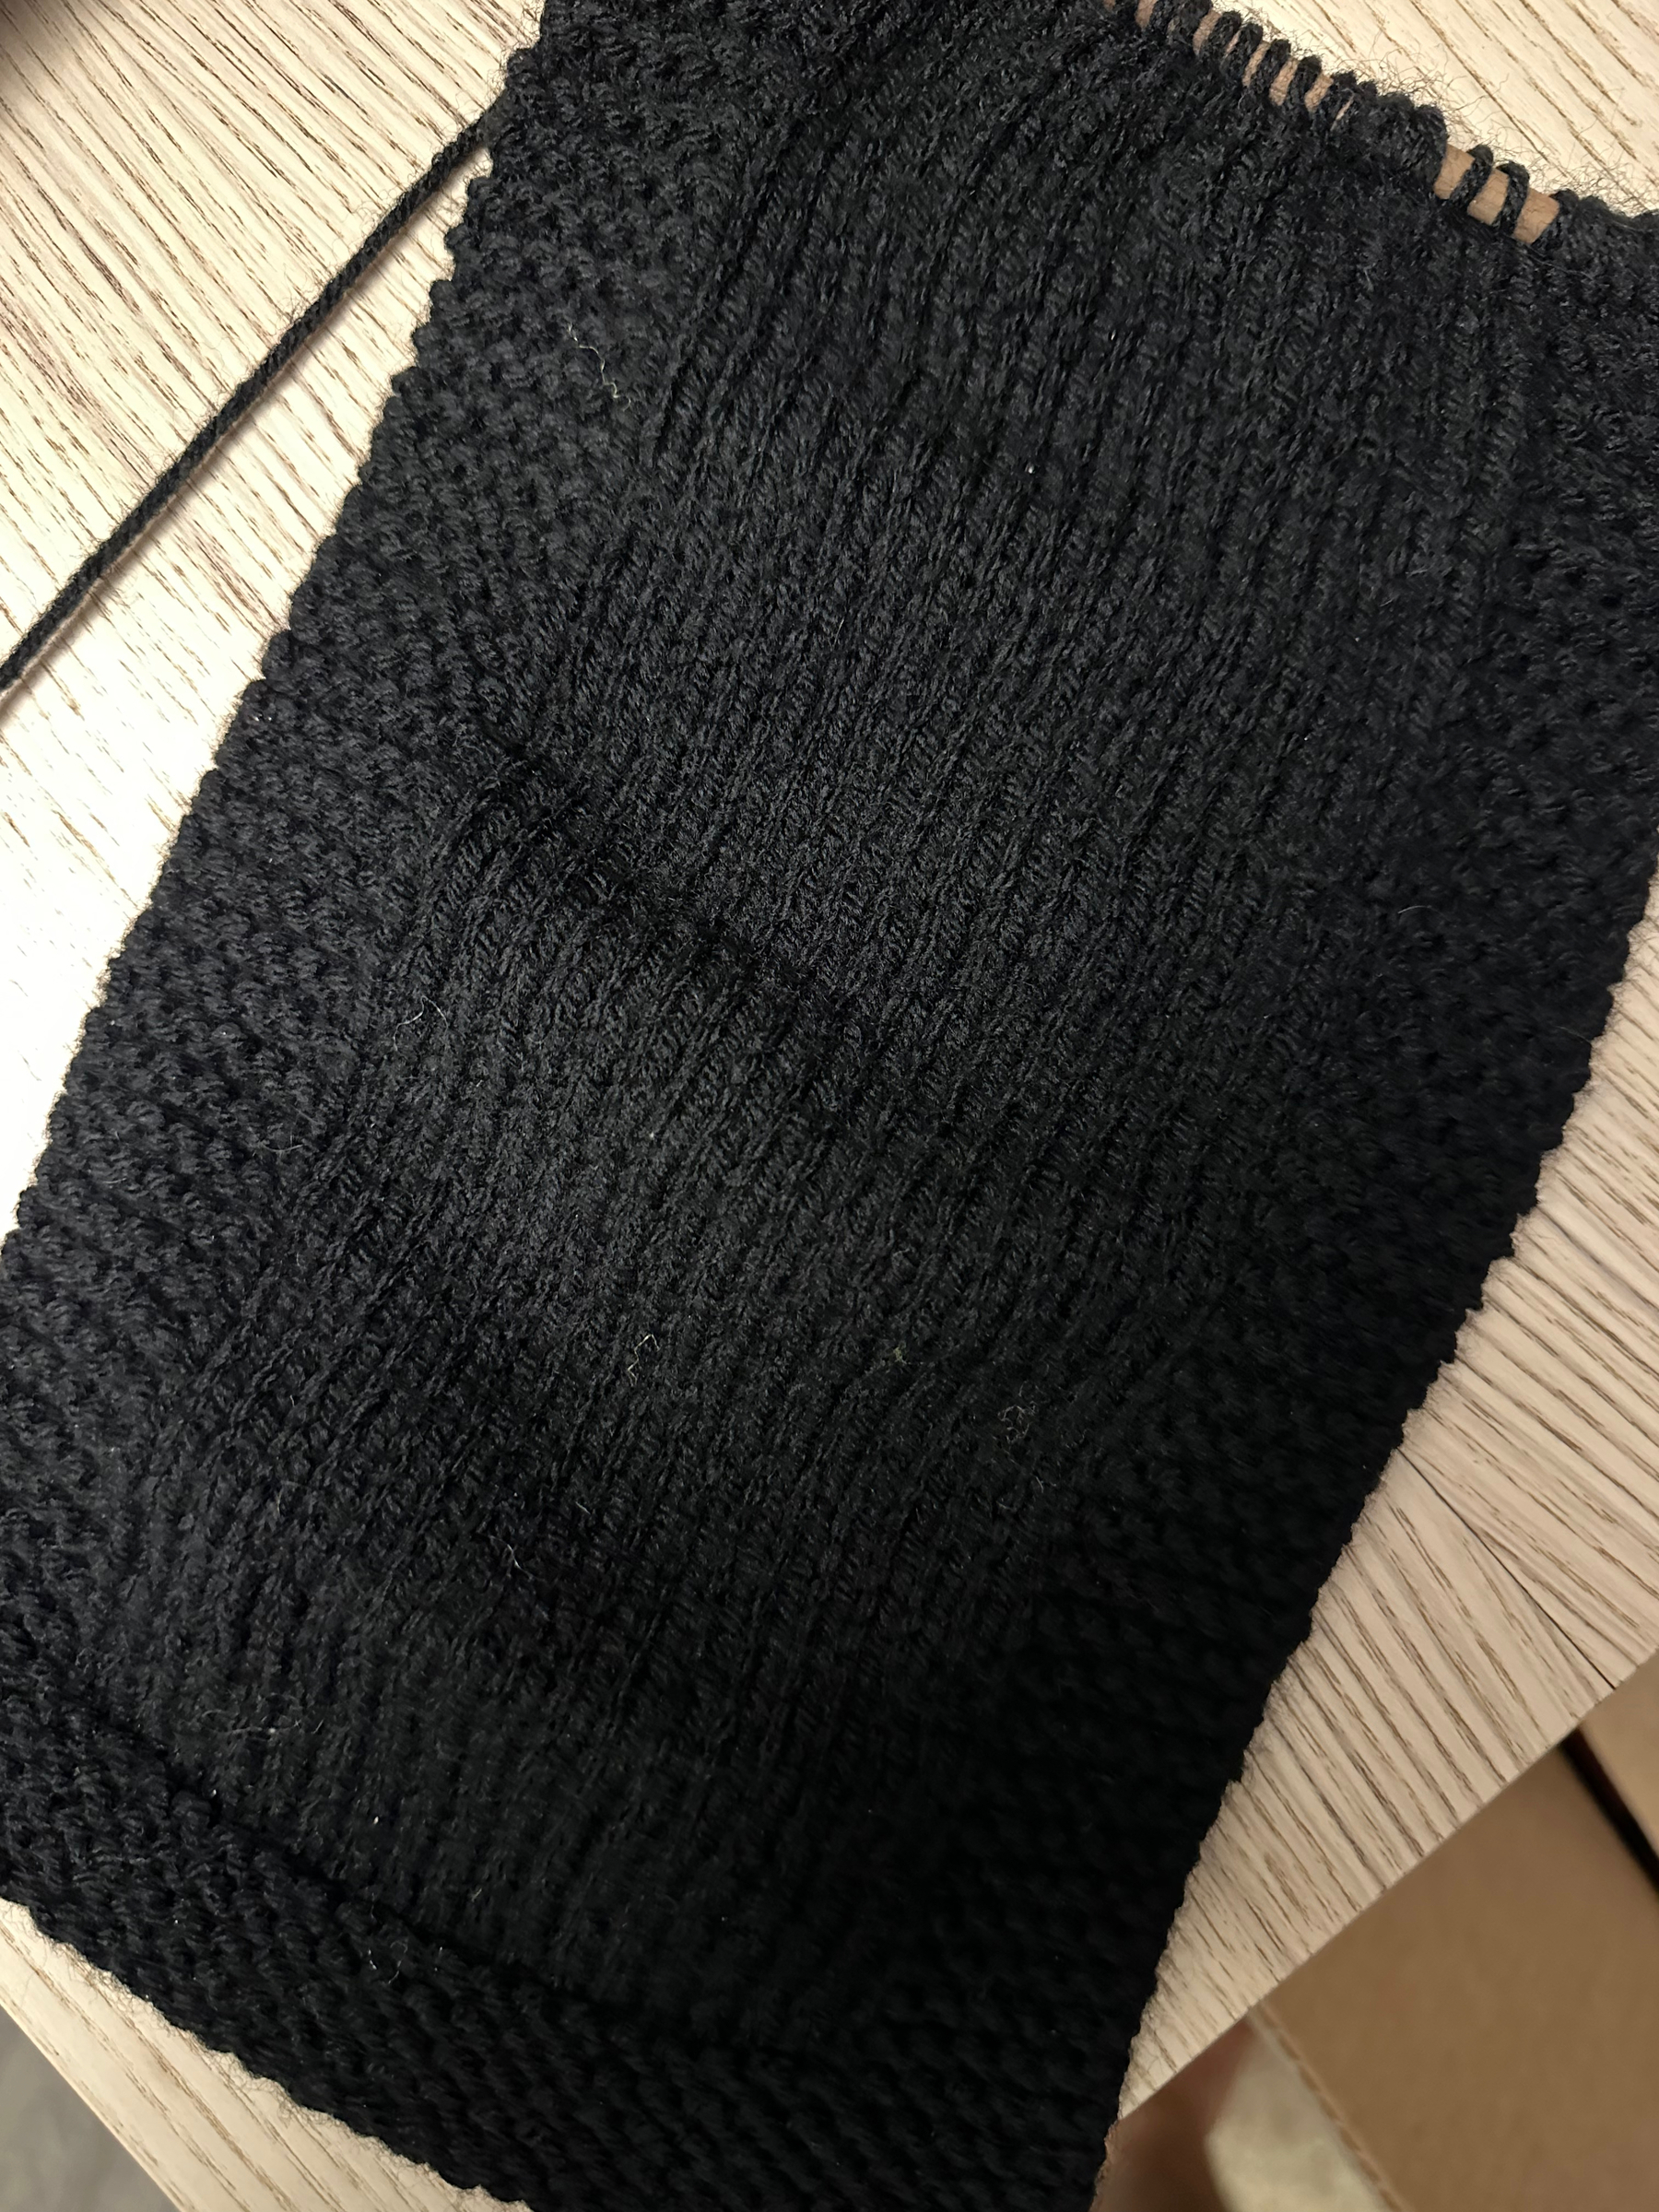 knitting project on the needle, a black scarf that I started back in early 2021